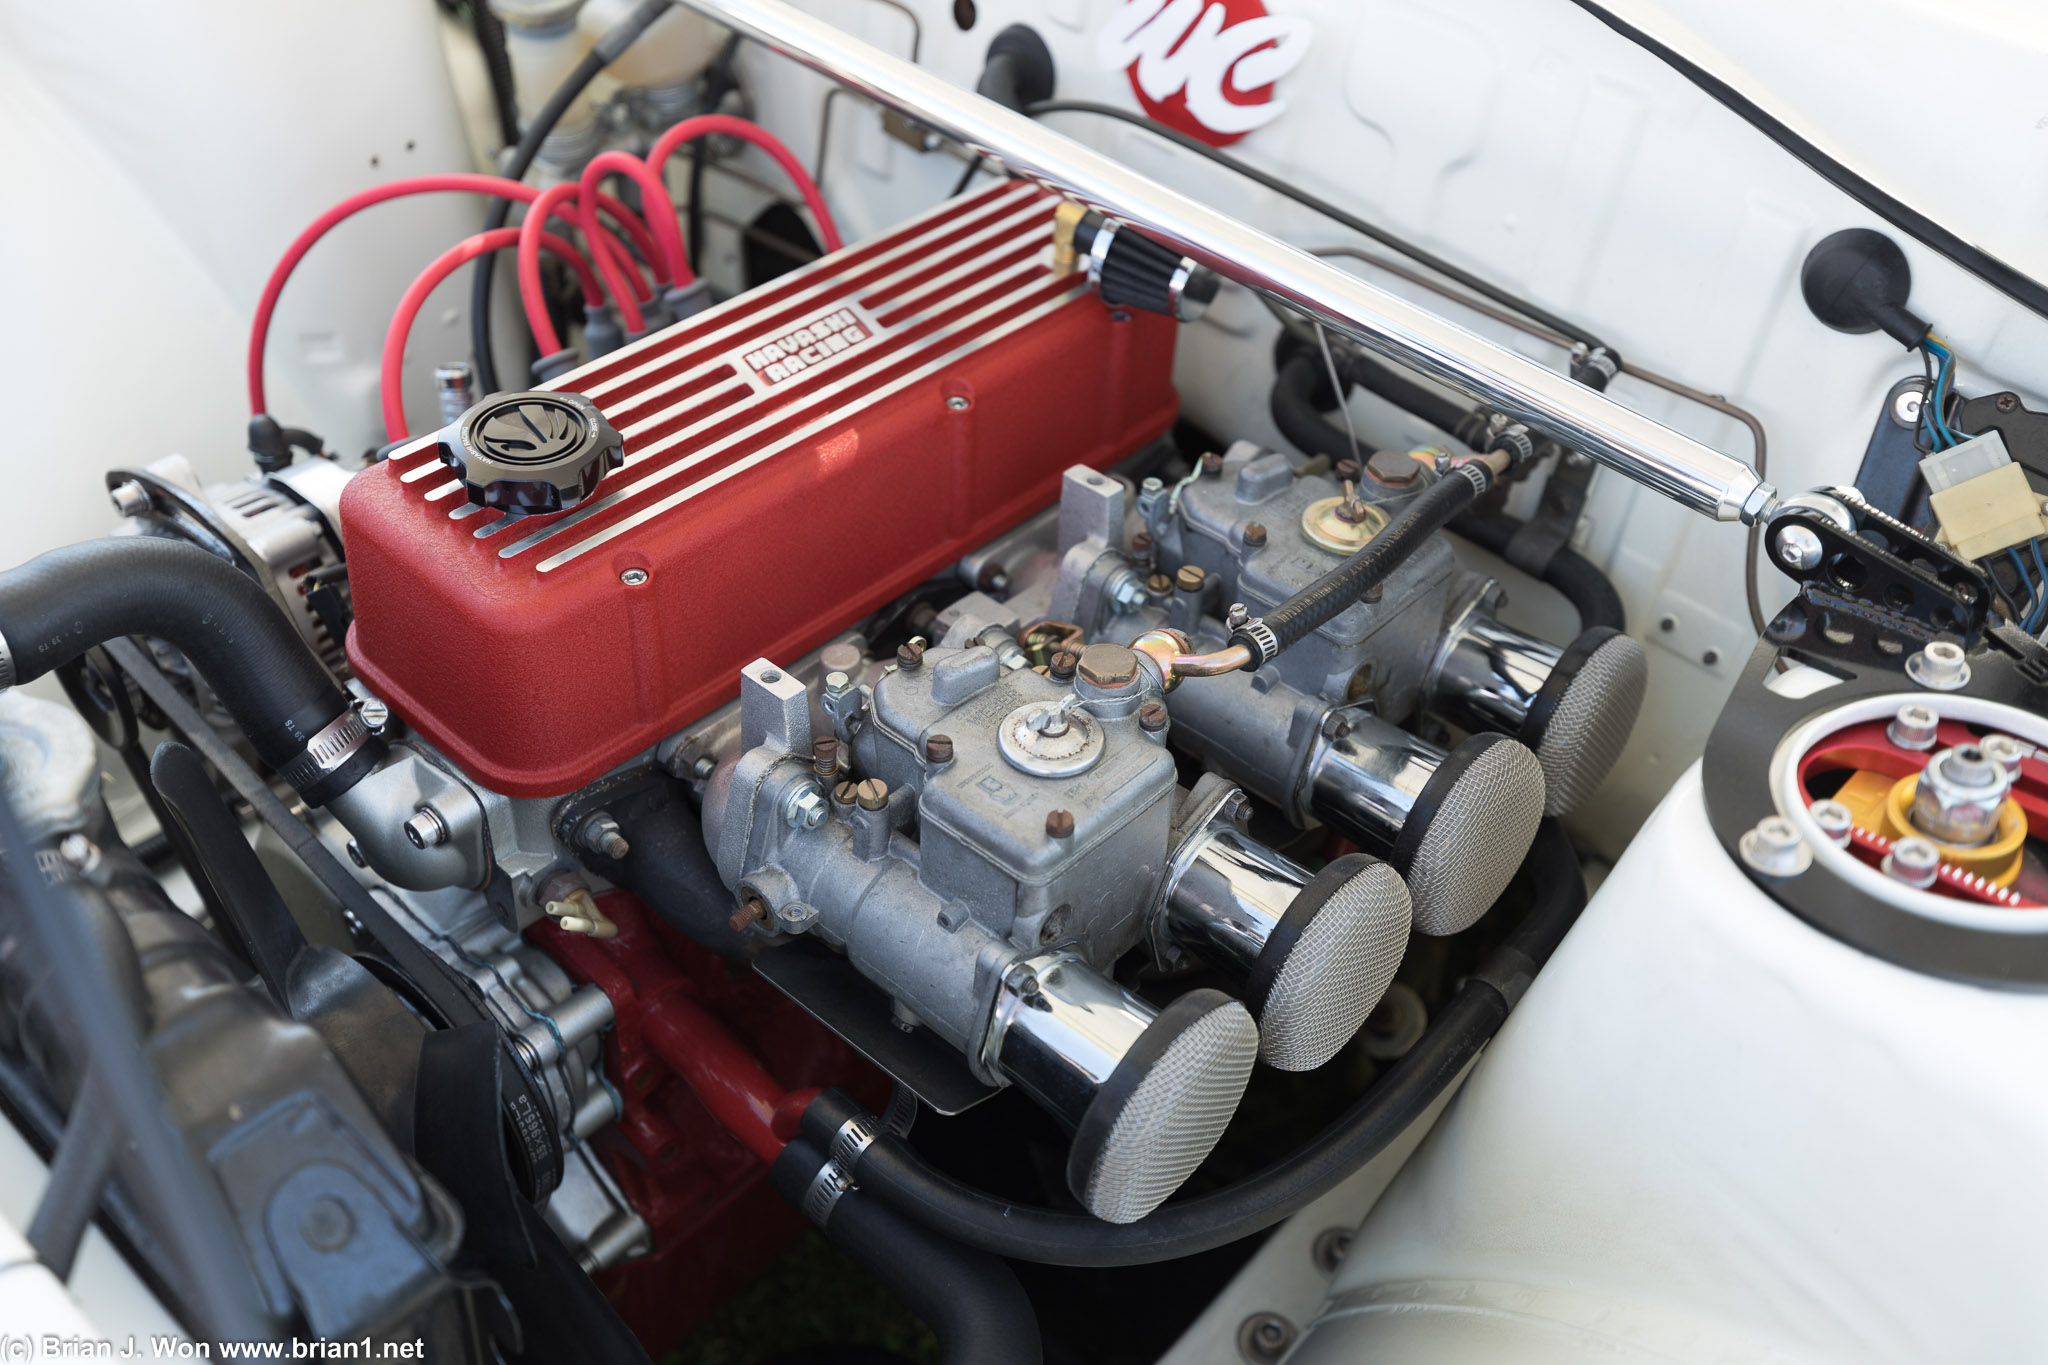 You could practically do surgery out of the engine bay.